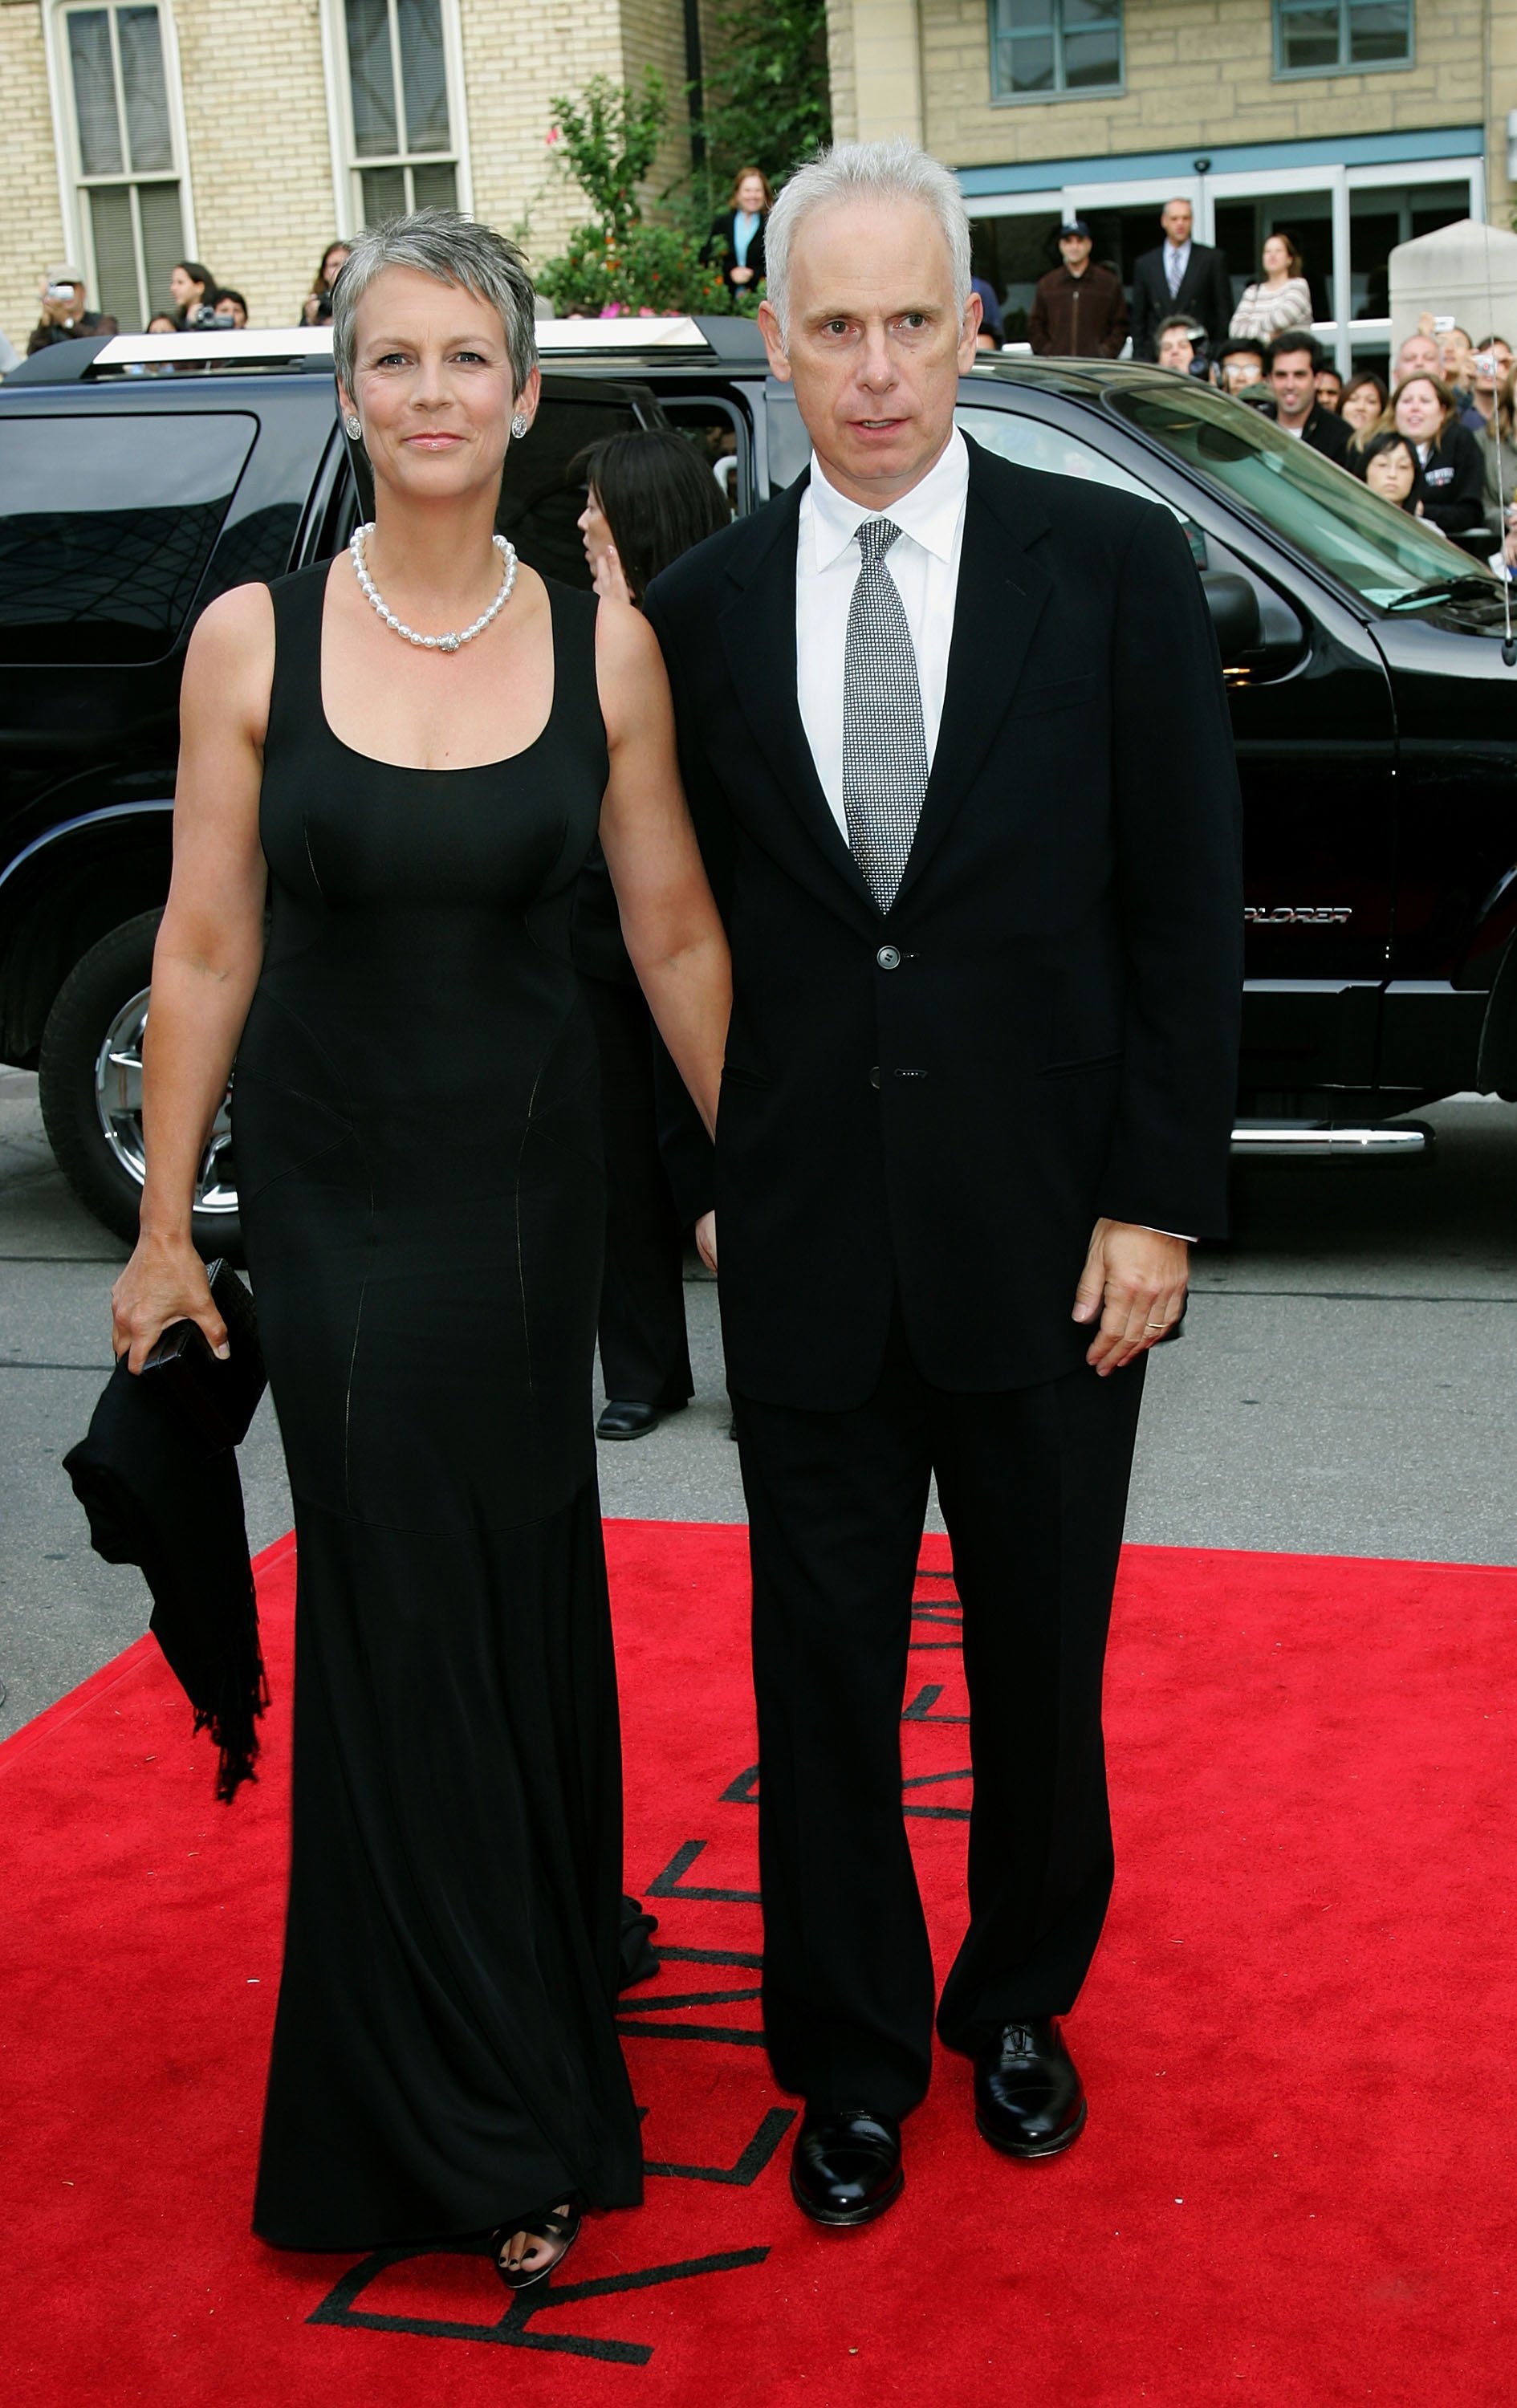 Jamie Lee Curtis and her husband Christopher Guest arrive at the Toronto International Film Festival gala presentation of the film "For Your Consideration" at the Roy Thomson Hall on September 10, 2006 in Toronto, Canada | Source: Getty Images